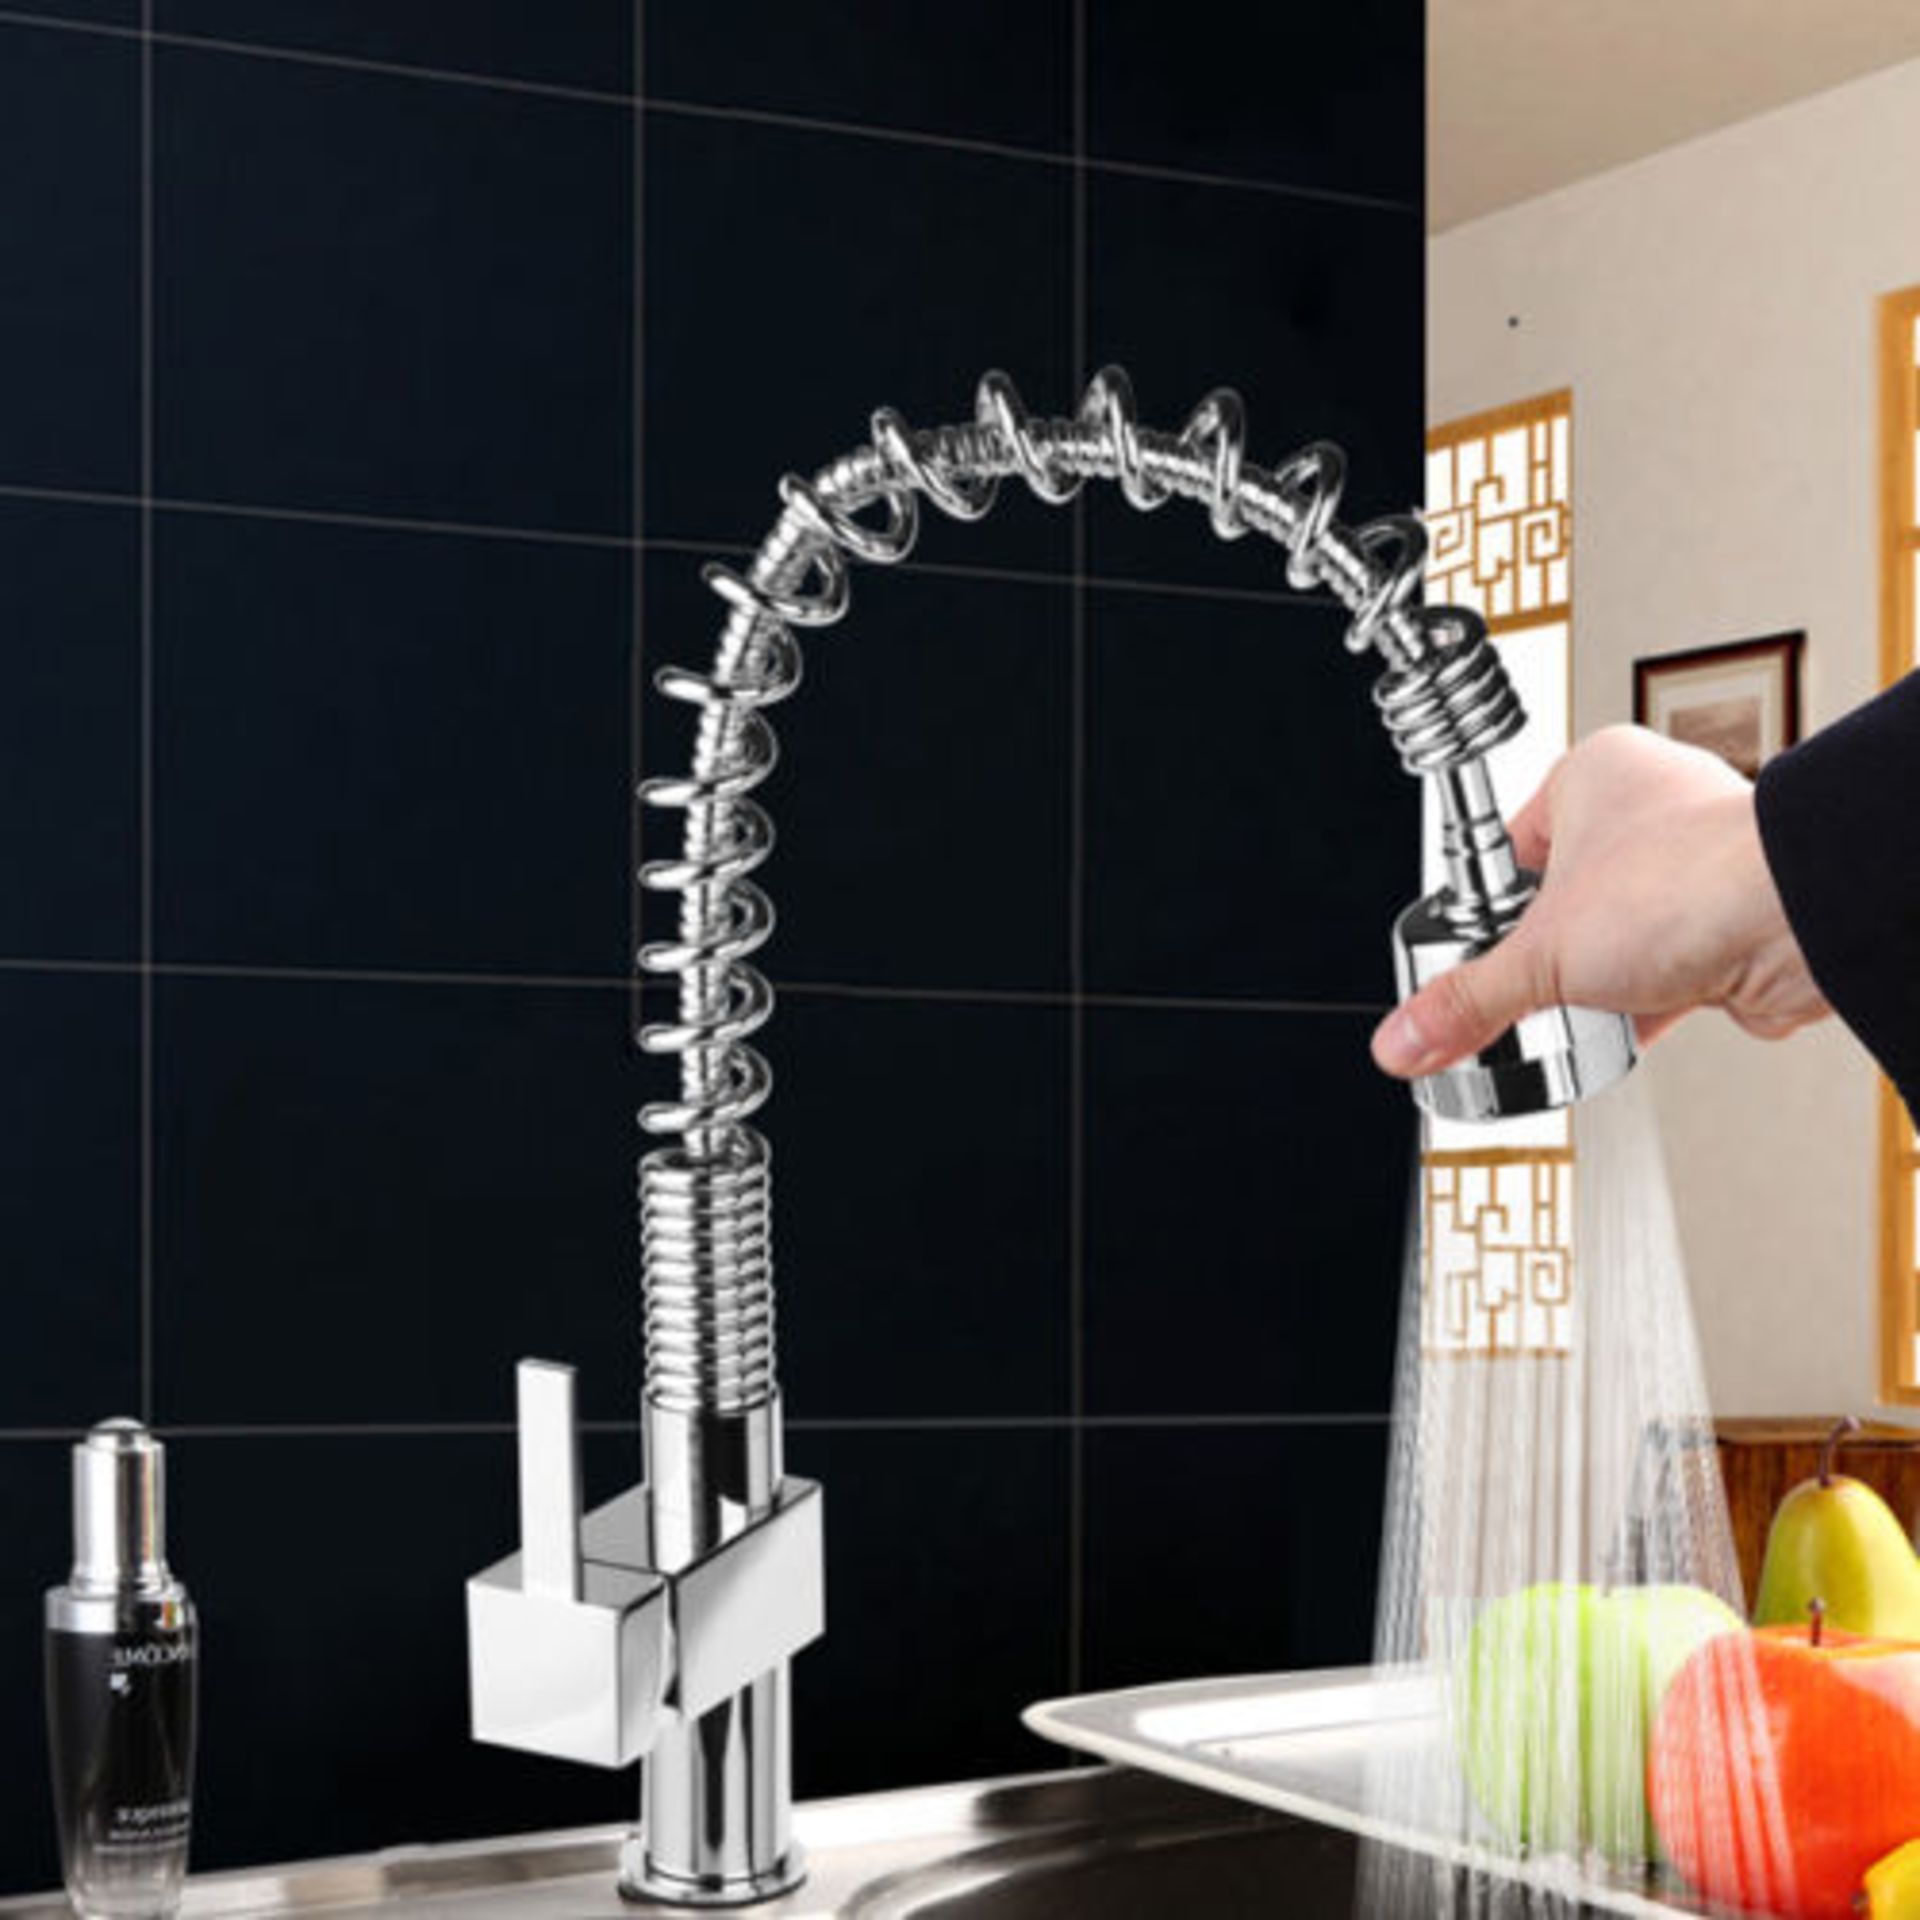 New Maddie Brushed Chrome Monobloc Kitchen Tap Swivel Pull Out Spray Mixer. RRP £219.99.Mater...